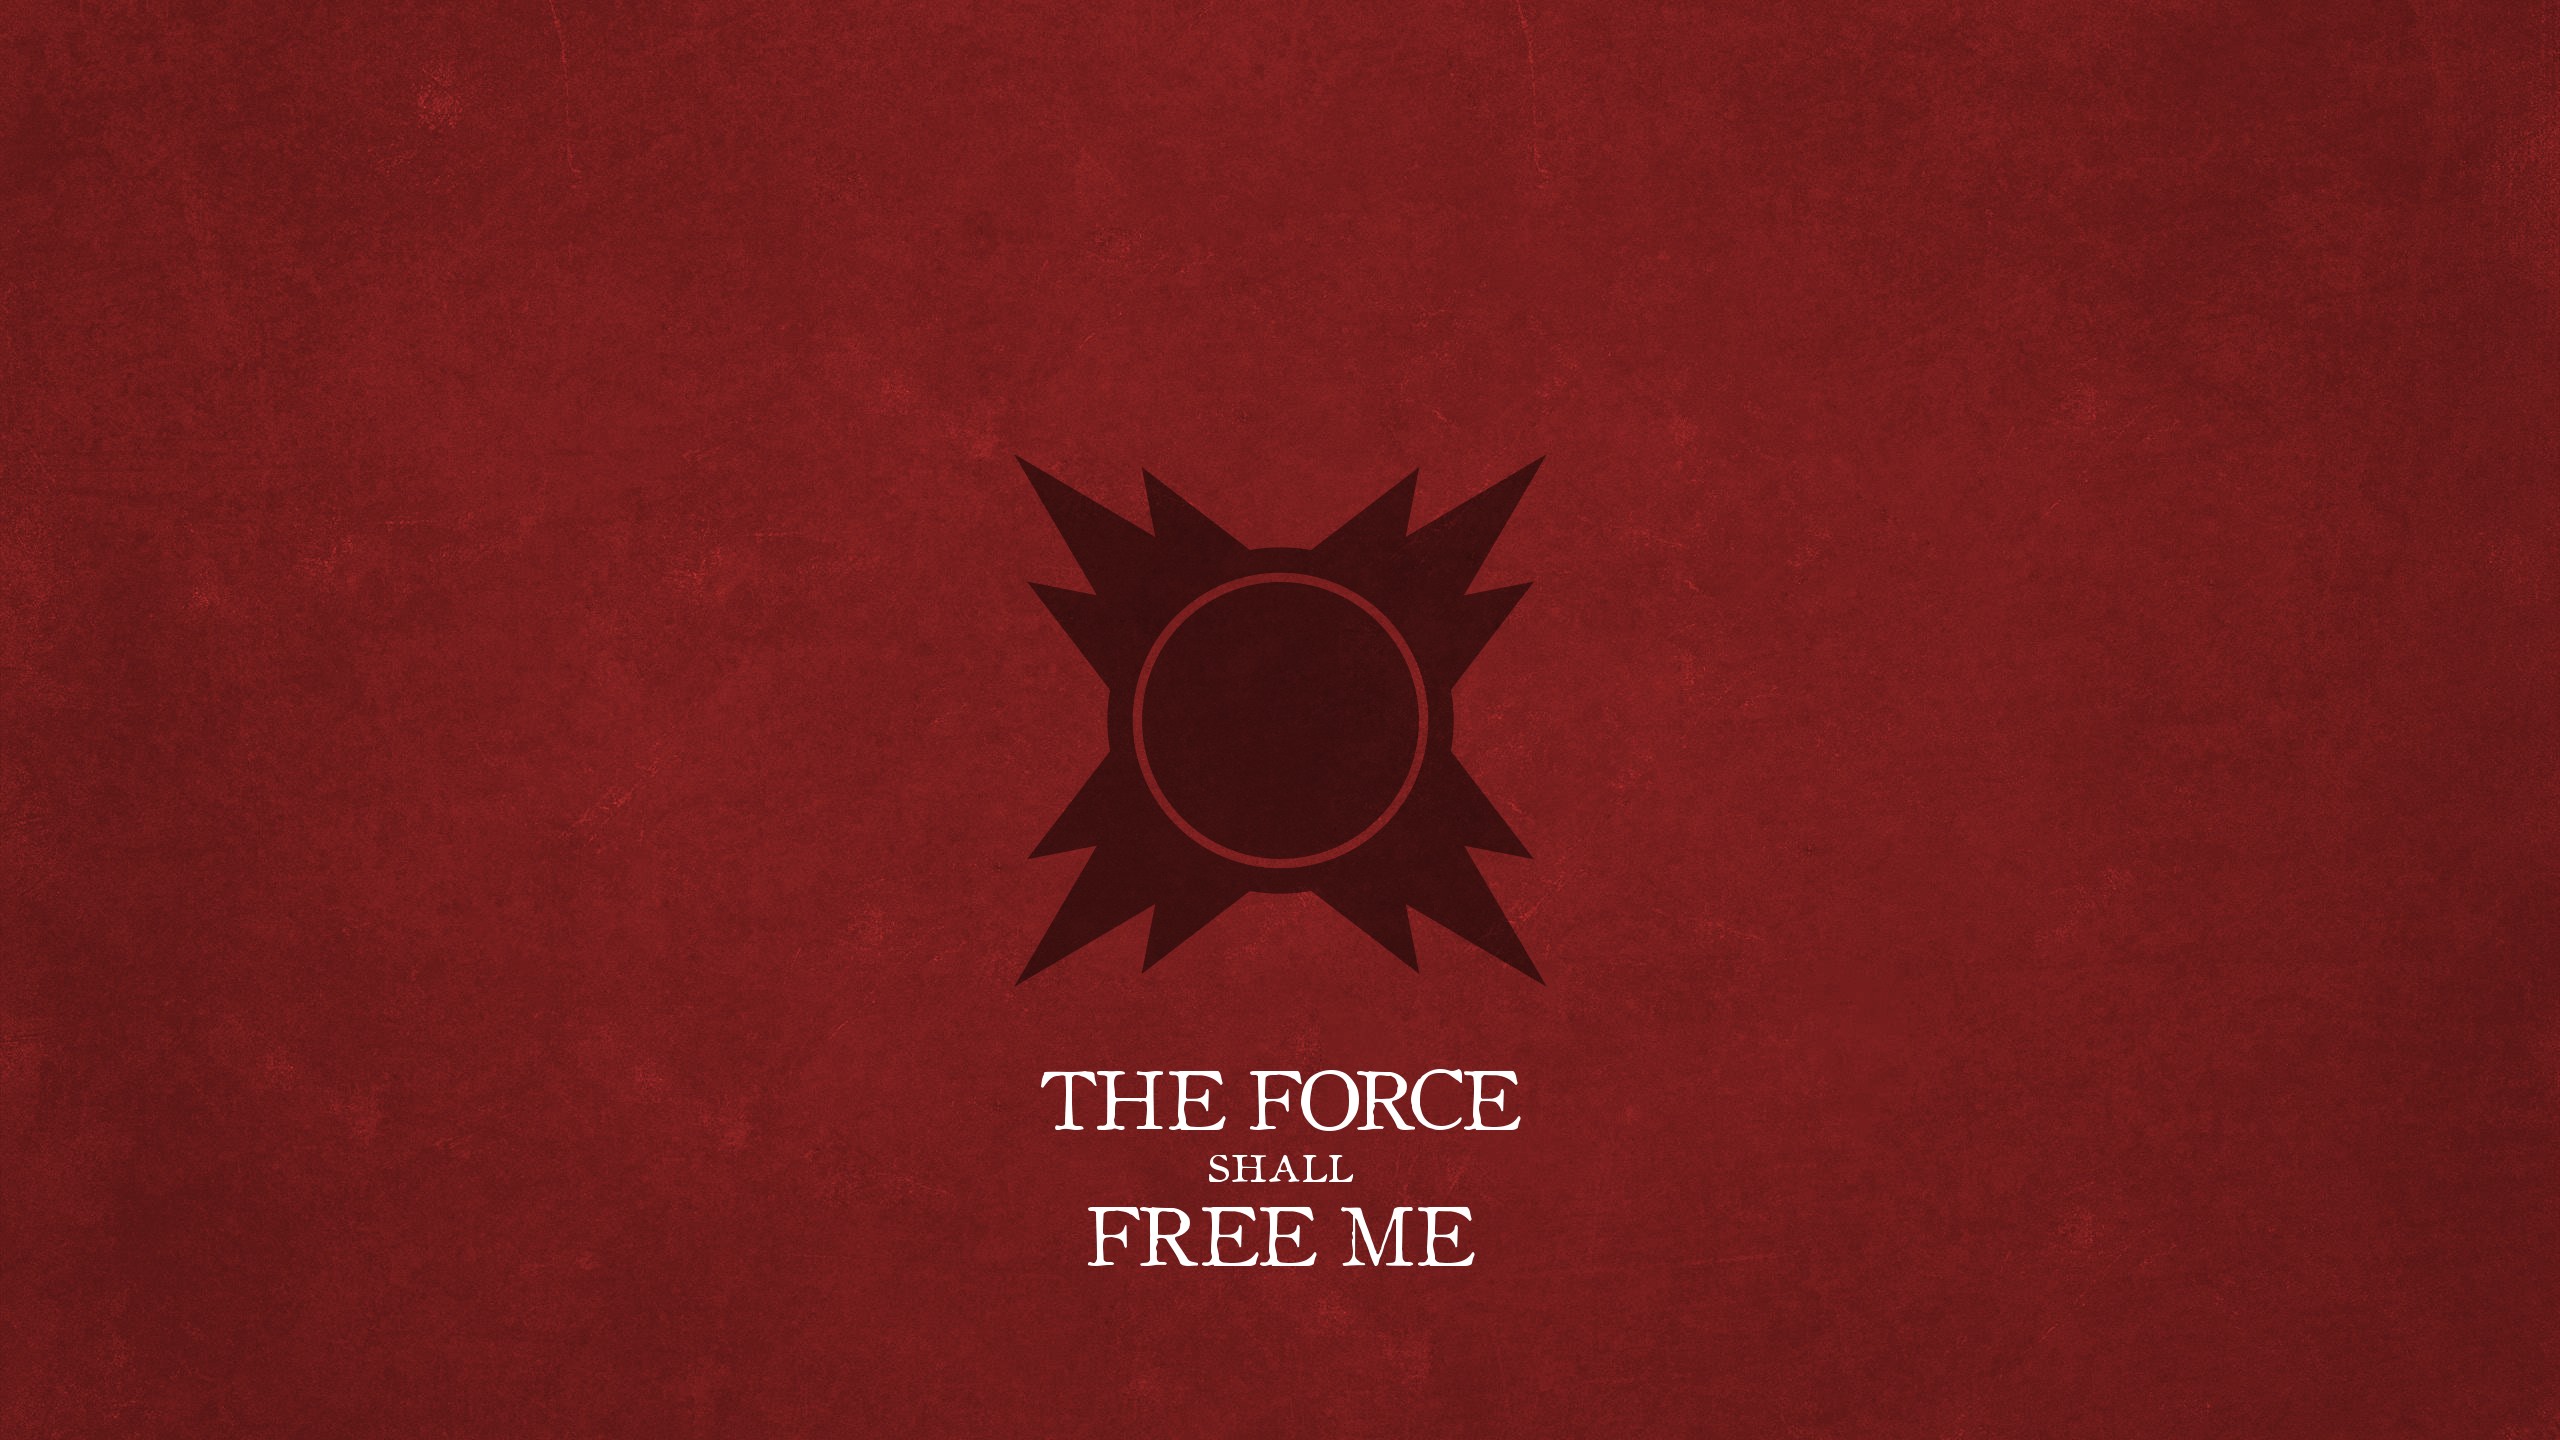 General 2560x1440 Star Wars simple background red background minimalism typography science fiction